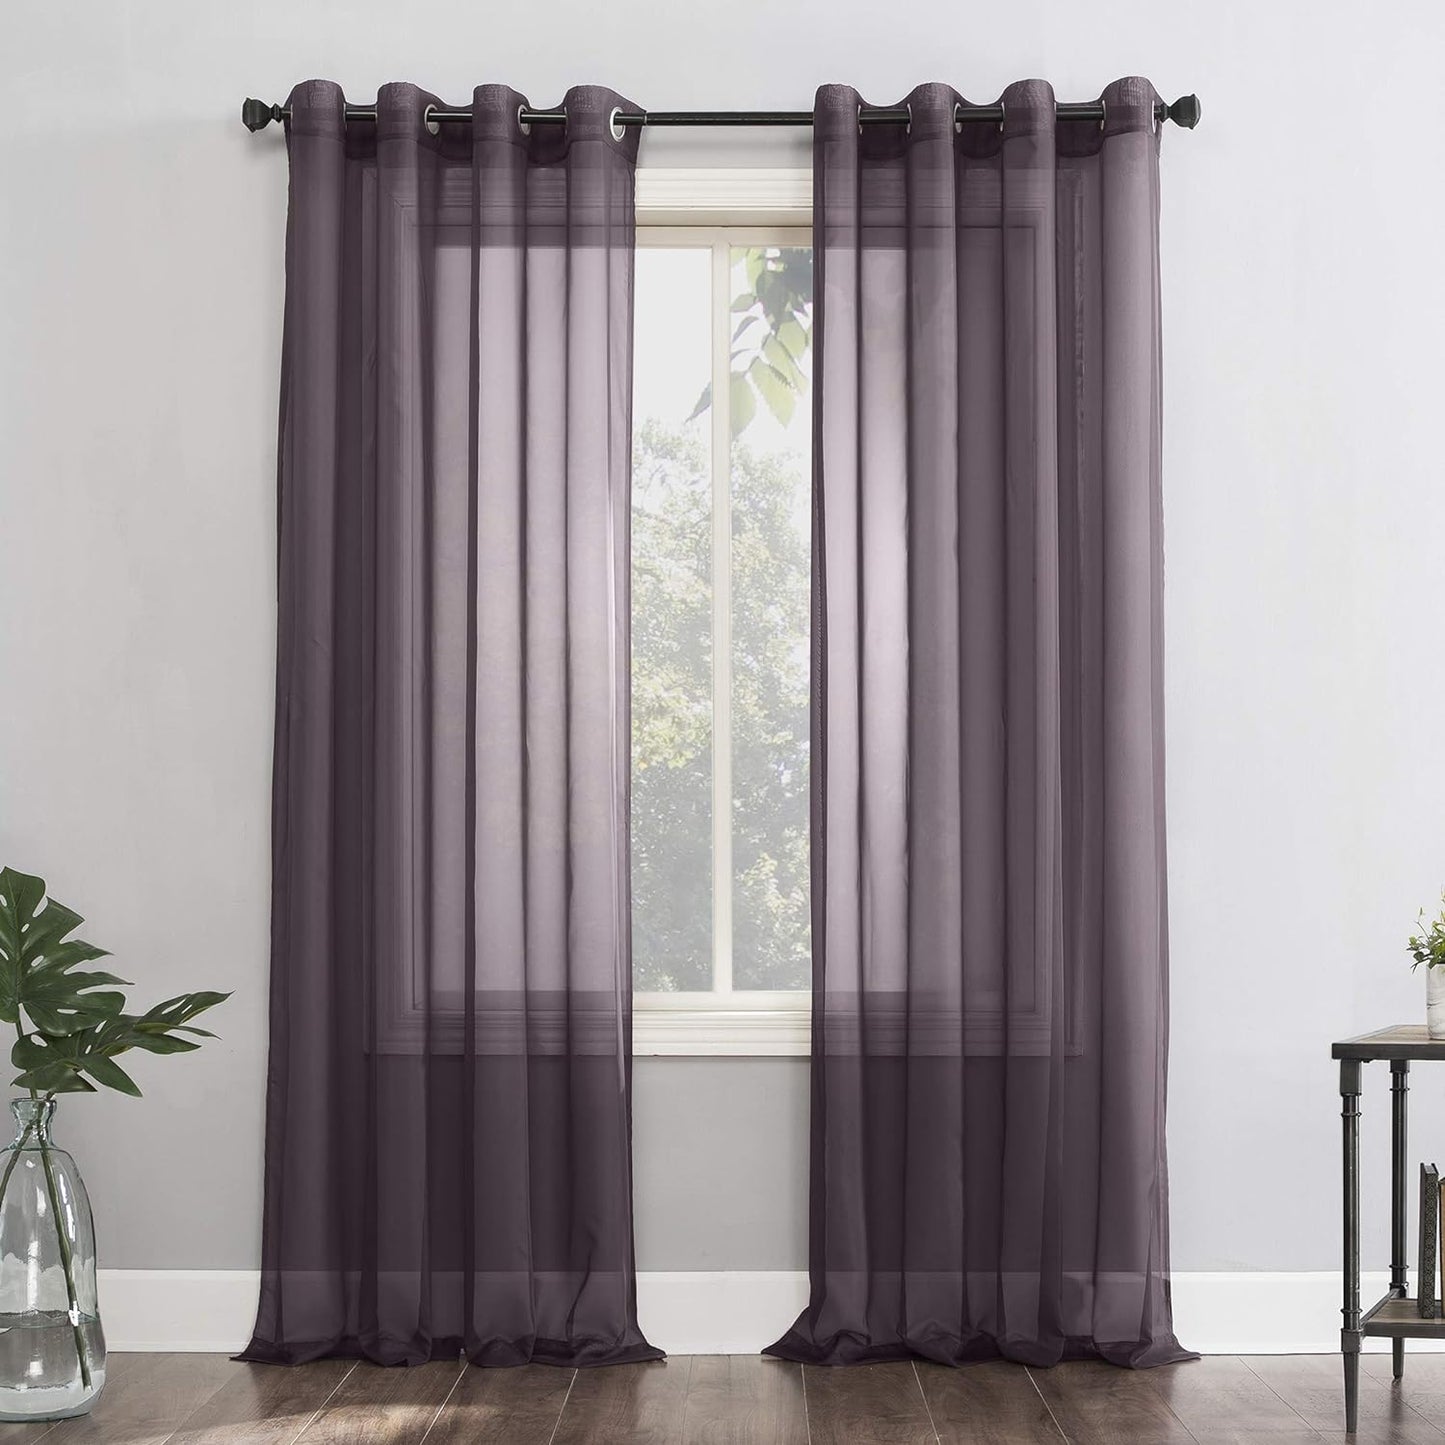 No. 918 Emily Sheer Voile Grommet Curtain Panel, 59" X 95", White  No. 918 Fig Purple Curtain Panel 59" X 84"